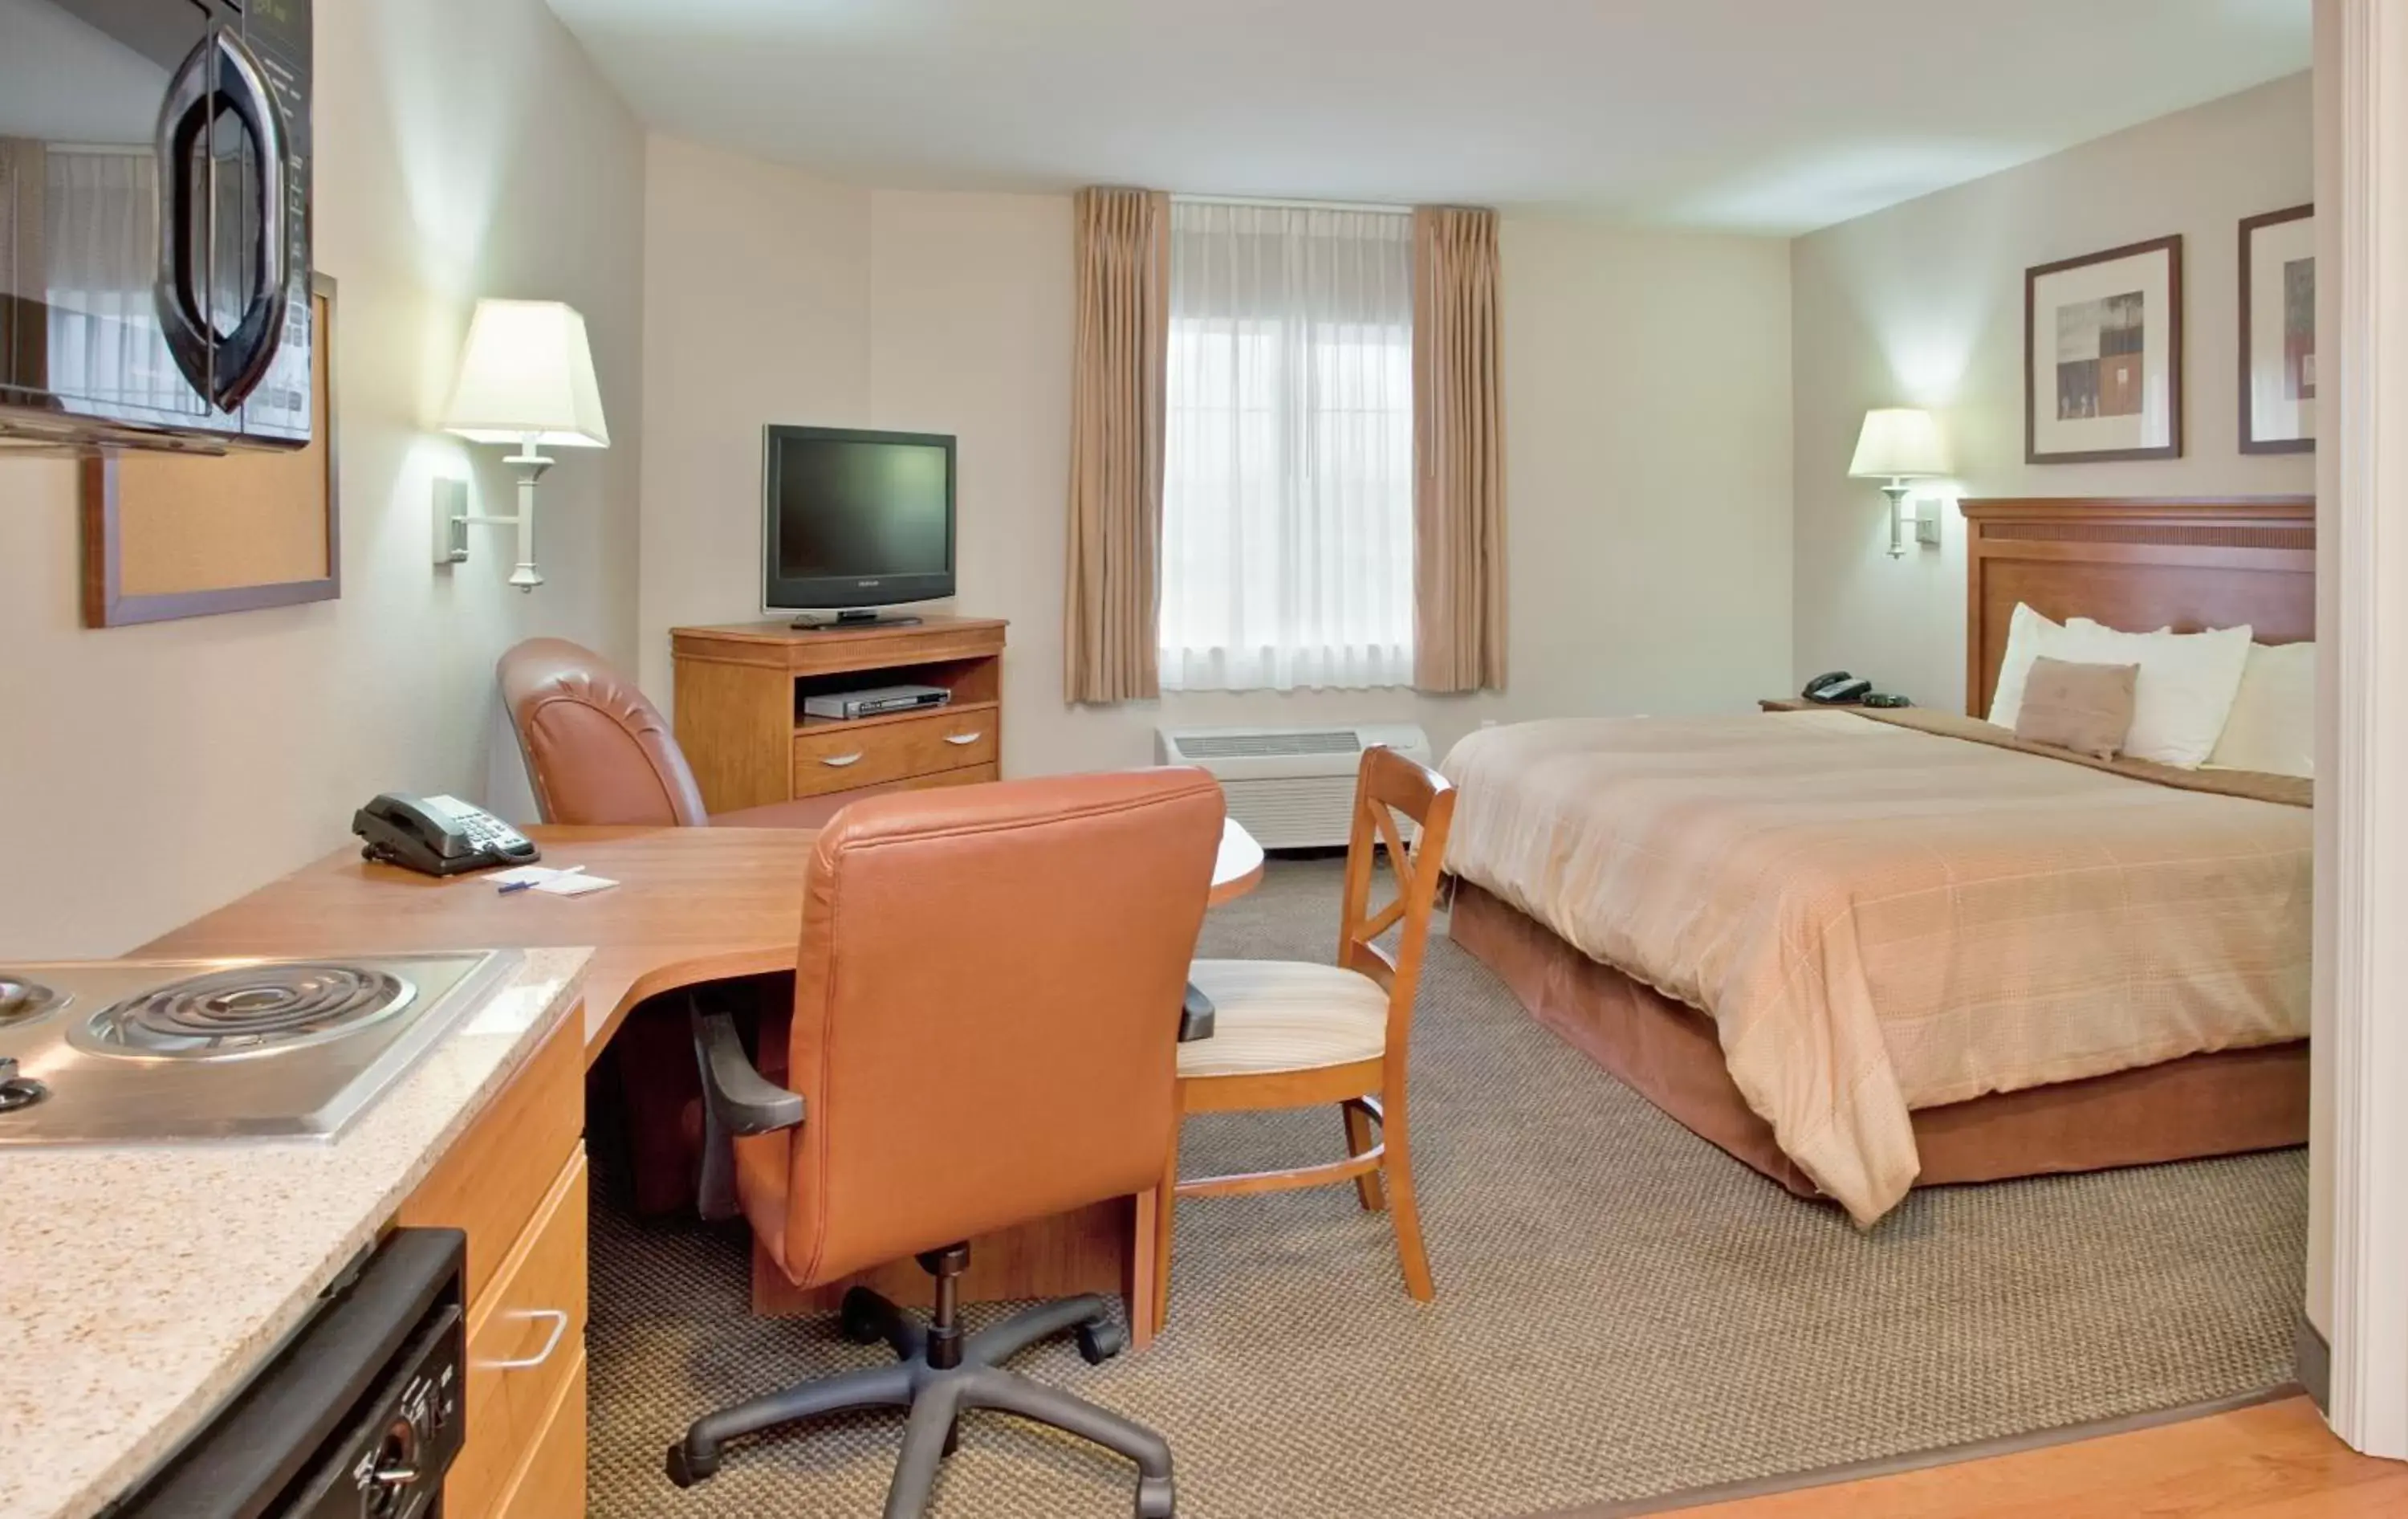 Deluxe Suite in Candlewood Suites Ofallon, Il - St. Louis Area, an IHG Hotel